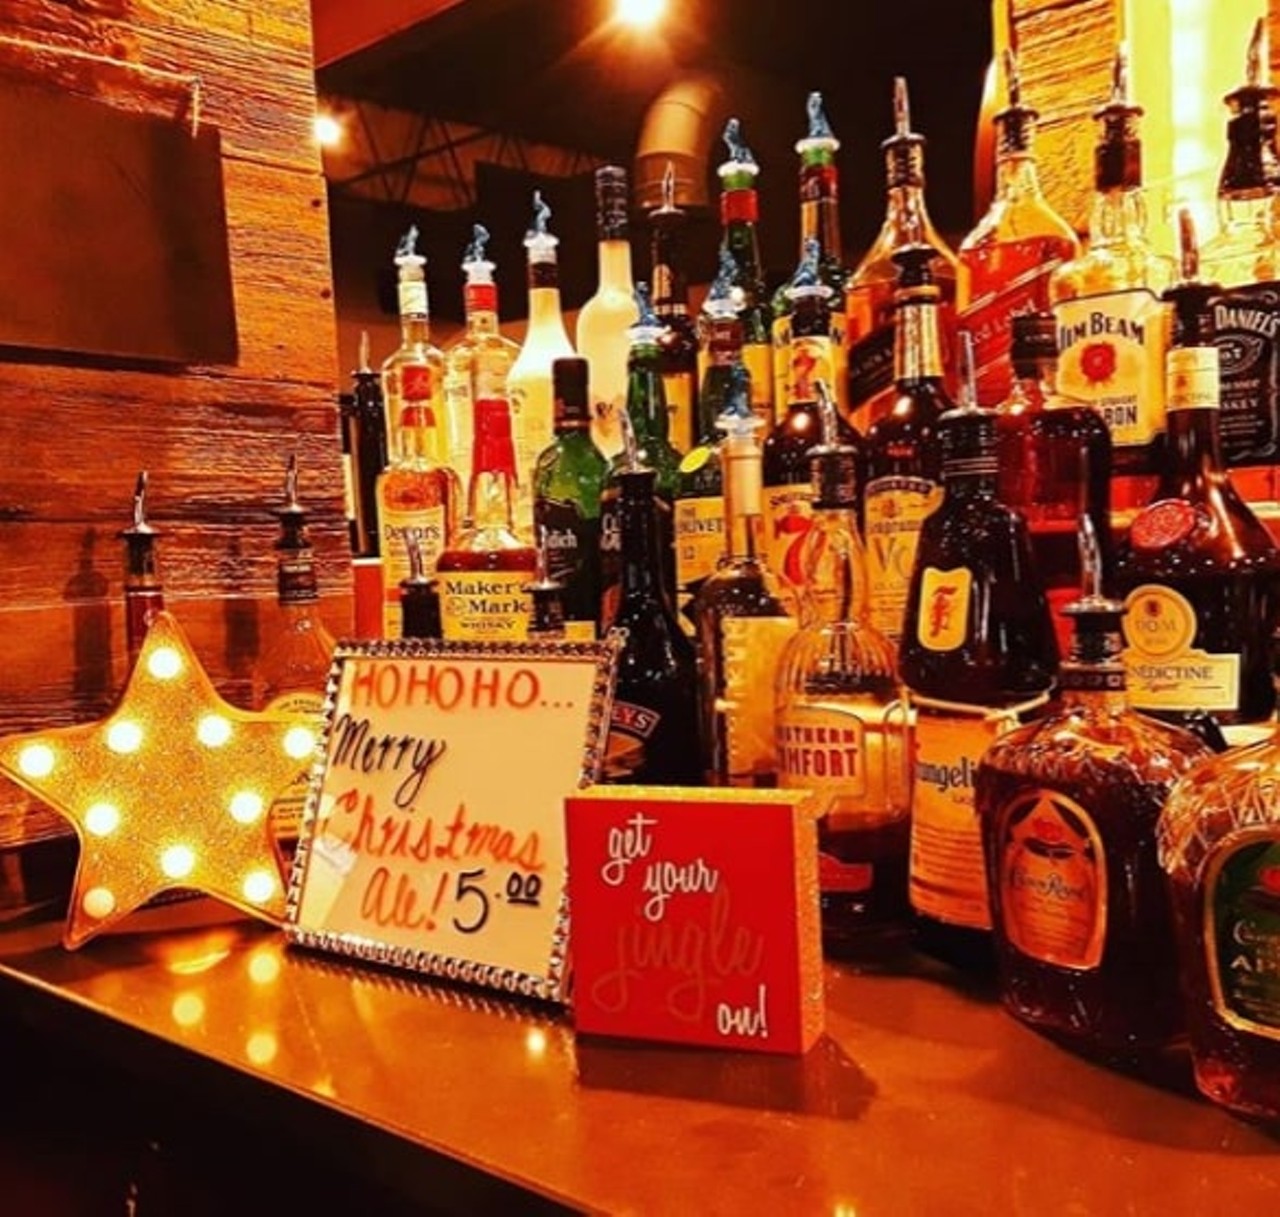 The Hub Bar and Grill
4181 West 150th St., Cleveland
The Hub is located in the Sheraton and opens at 6 a.m. They also have great craft brews and burgers.
Photo via im_afairy/Instagram